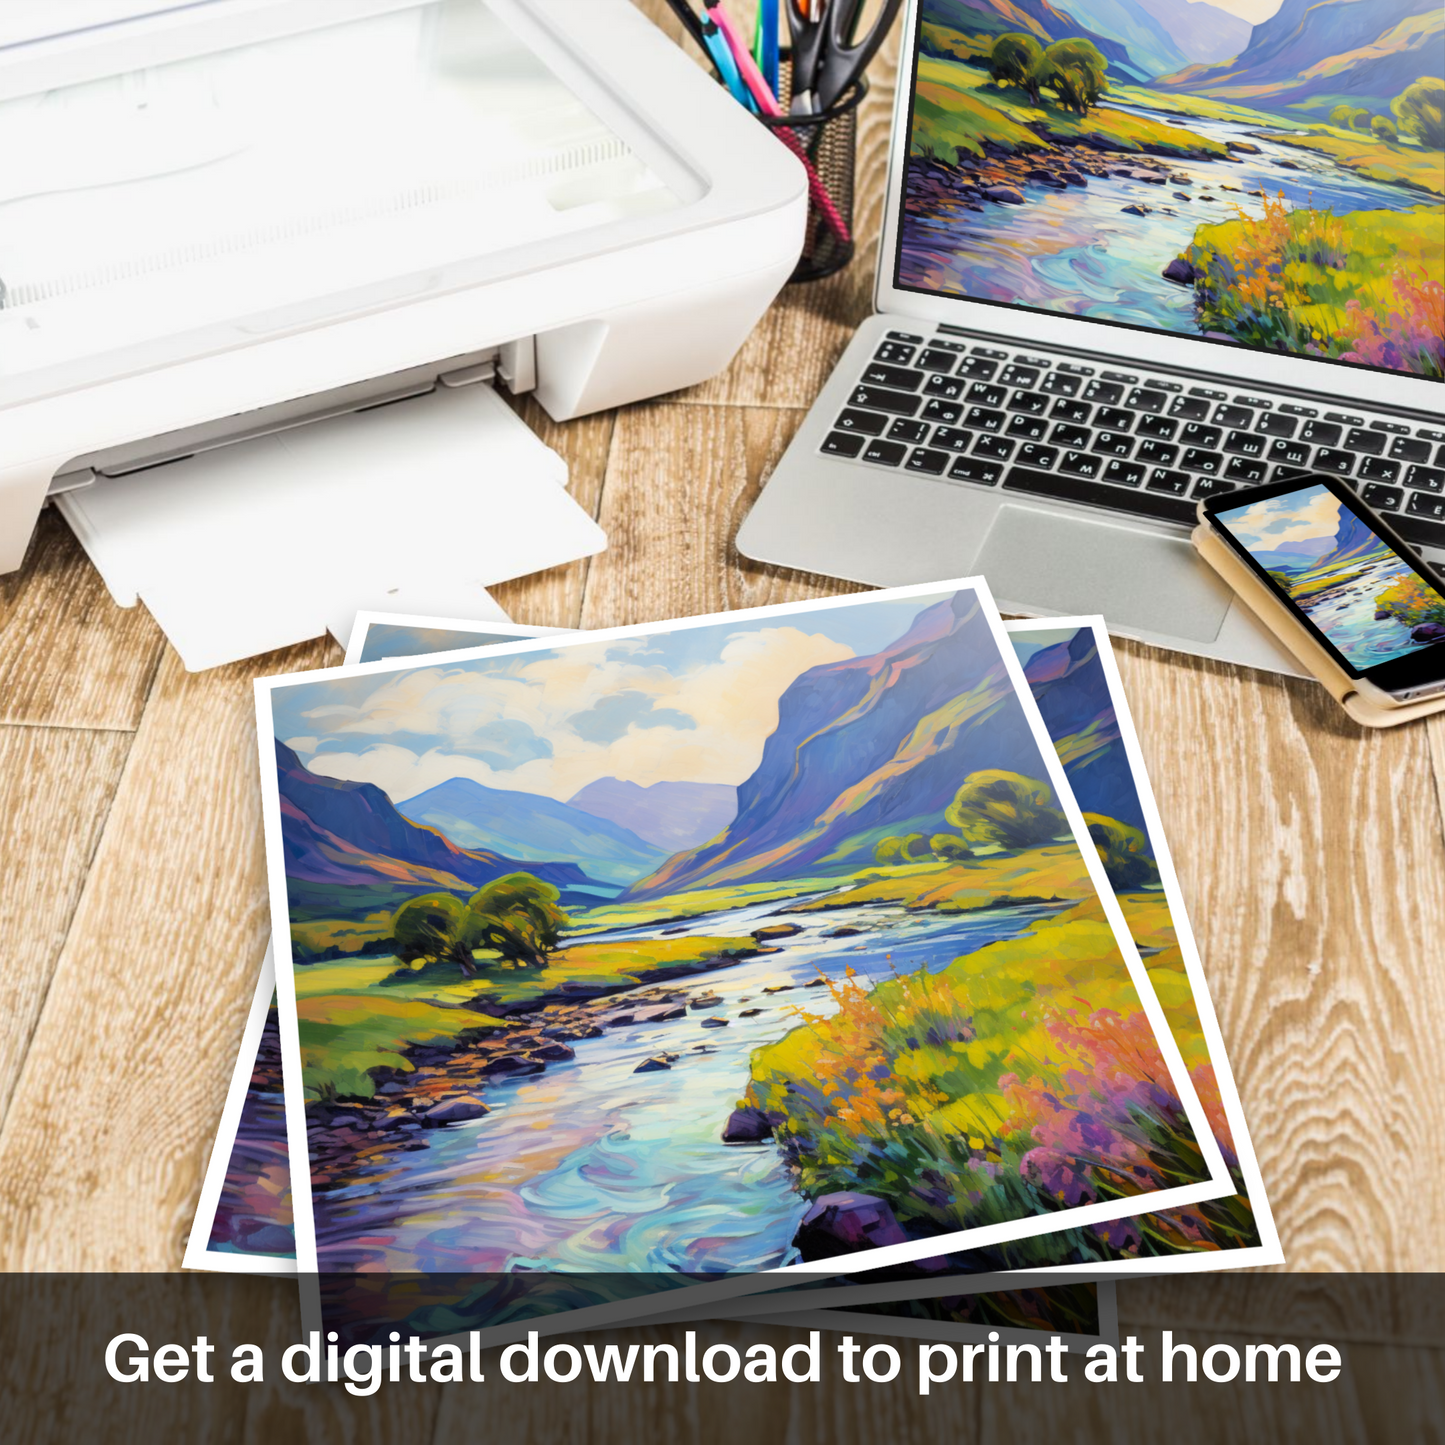 Downloadable and printable picture of River in Glencoe during summer